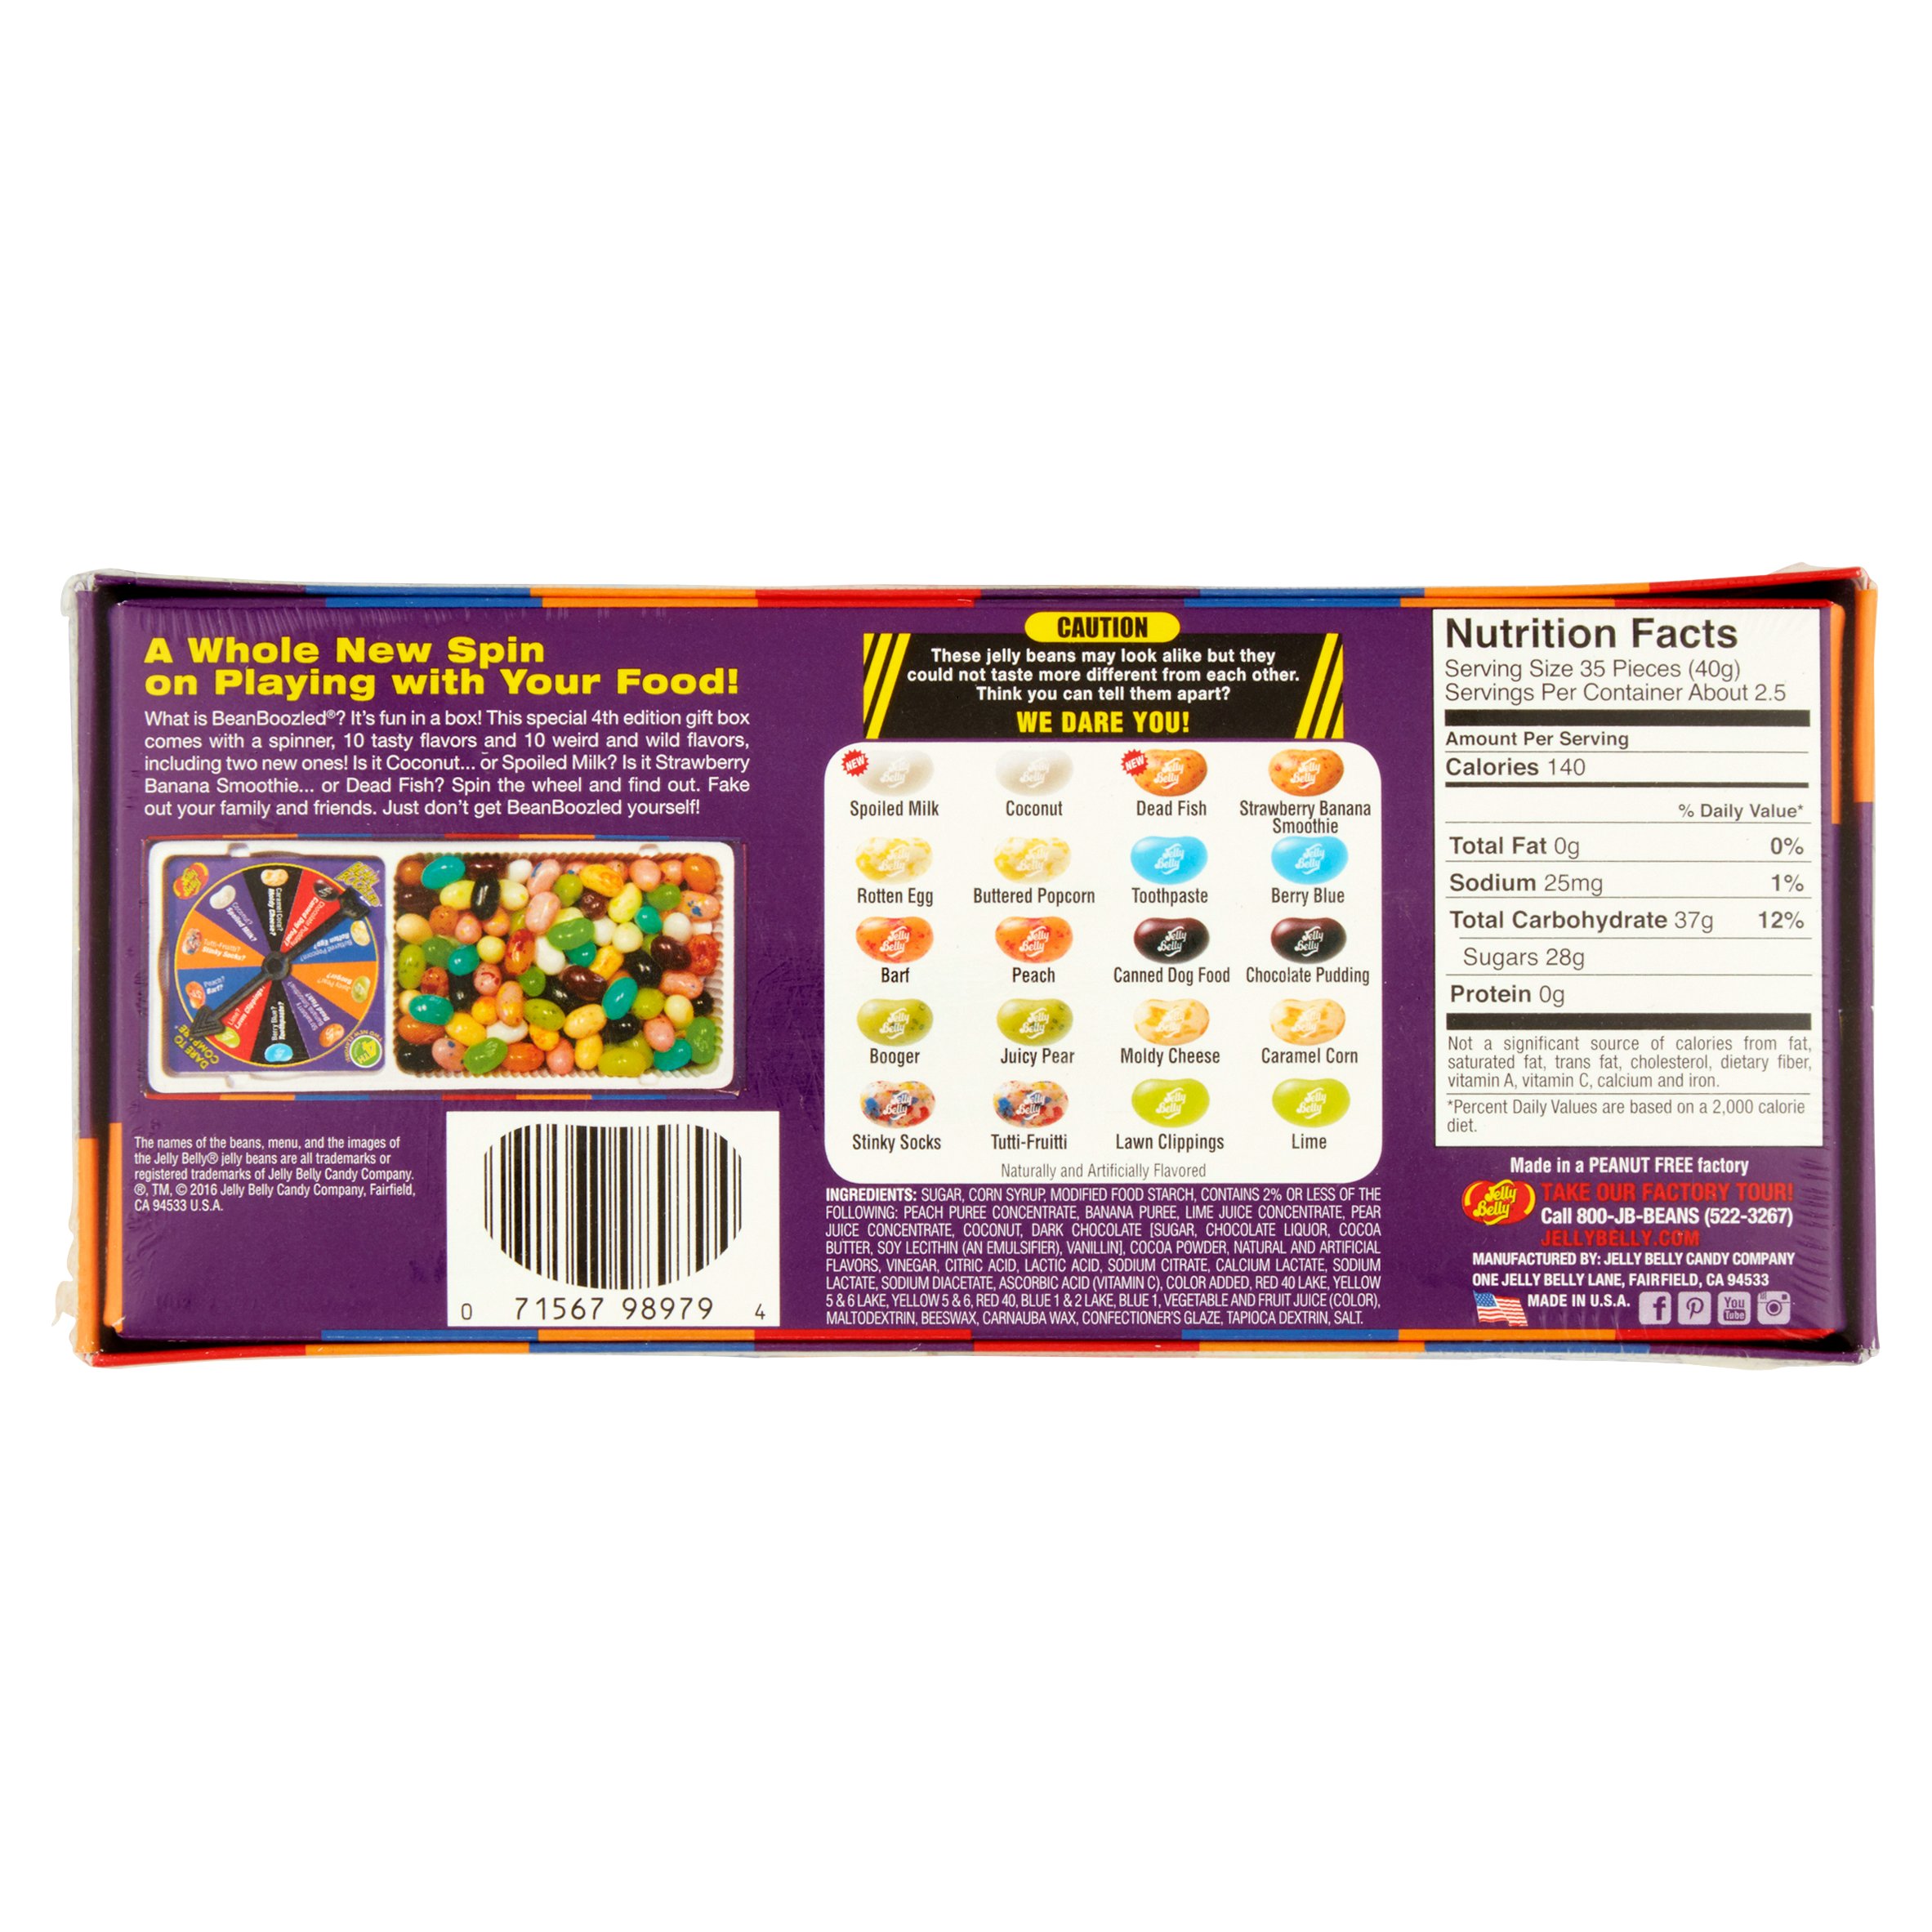 Jelly Belly BeanBoozled Jelly Beans, 20 Assorted Flavors, 3.5 oz Theater Box - image 9 of 9